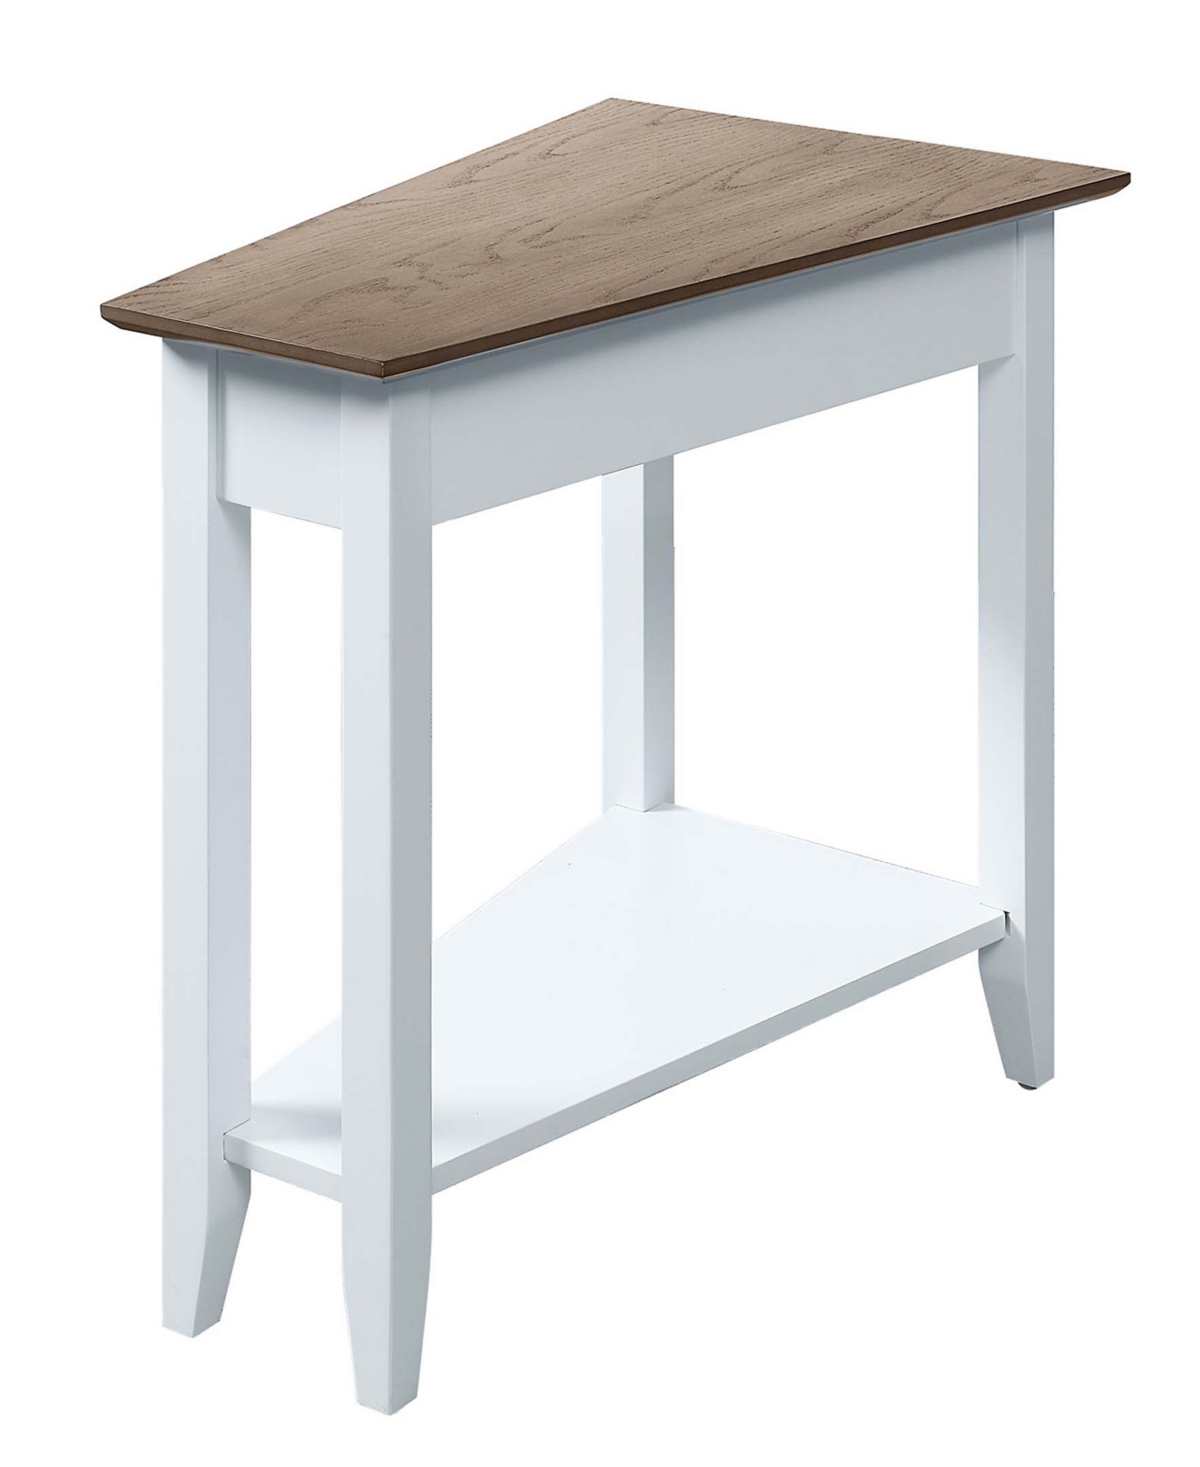 Convenience Concepts 24" Rubber Wood Ah Wedge End Table With Shelf In Driftwood,white